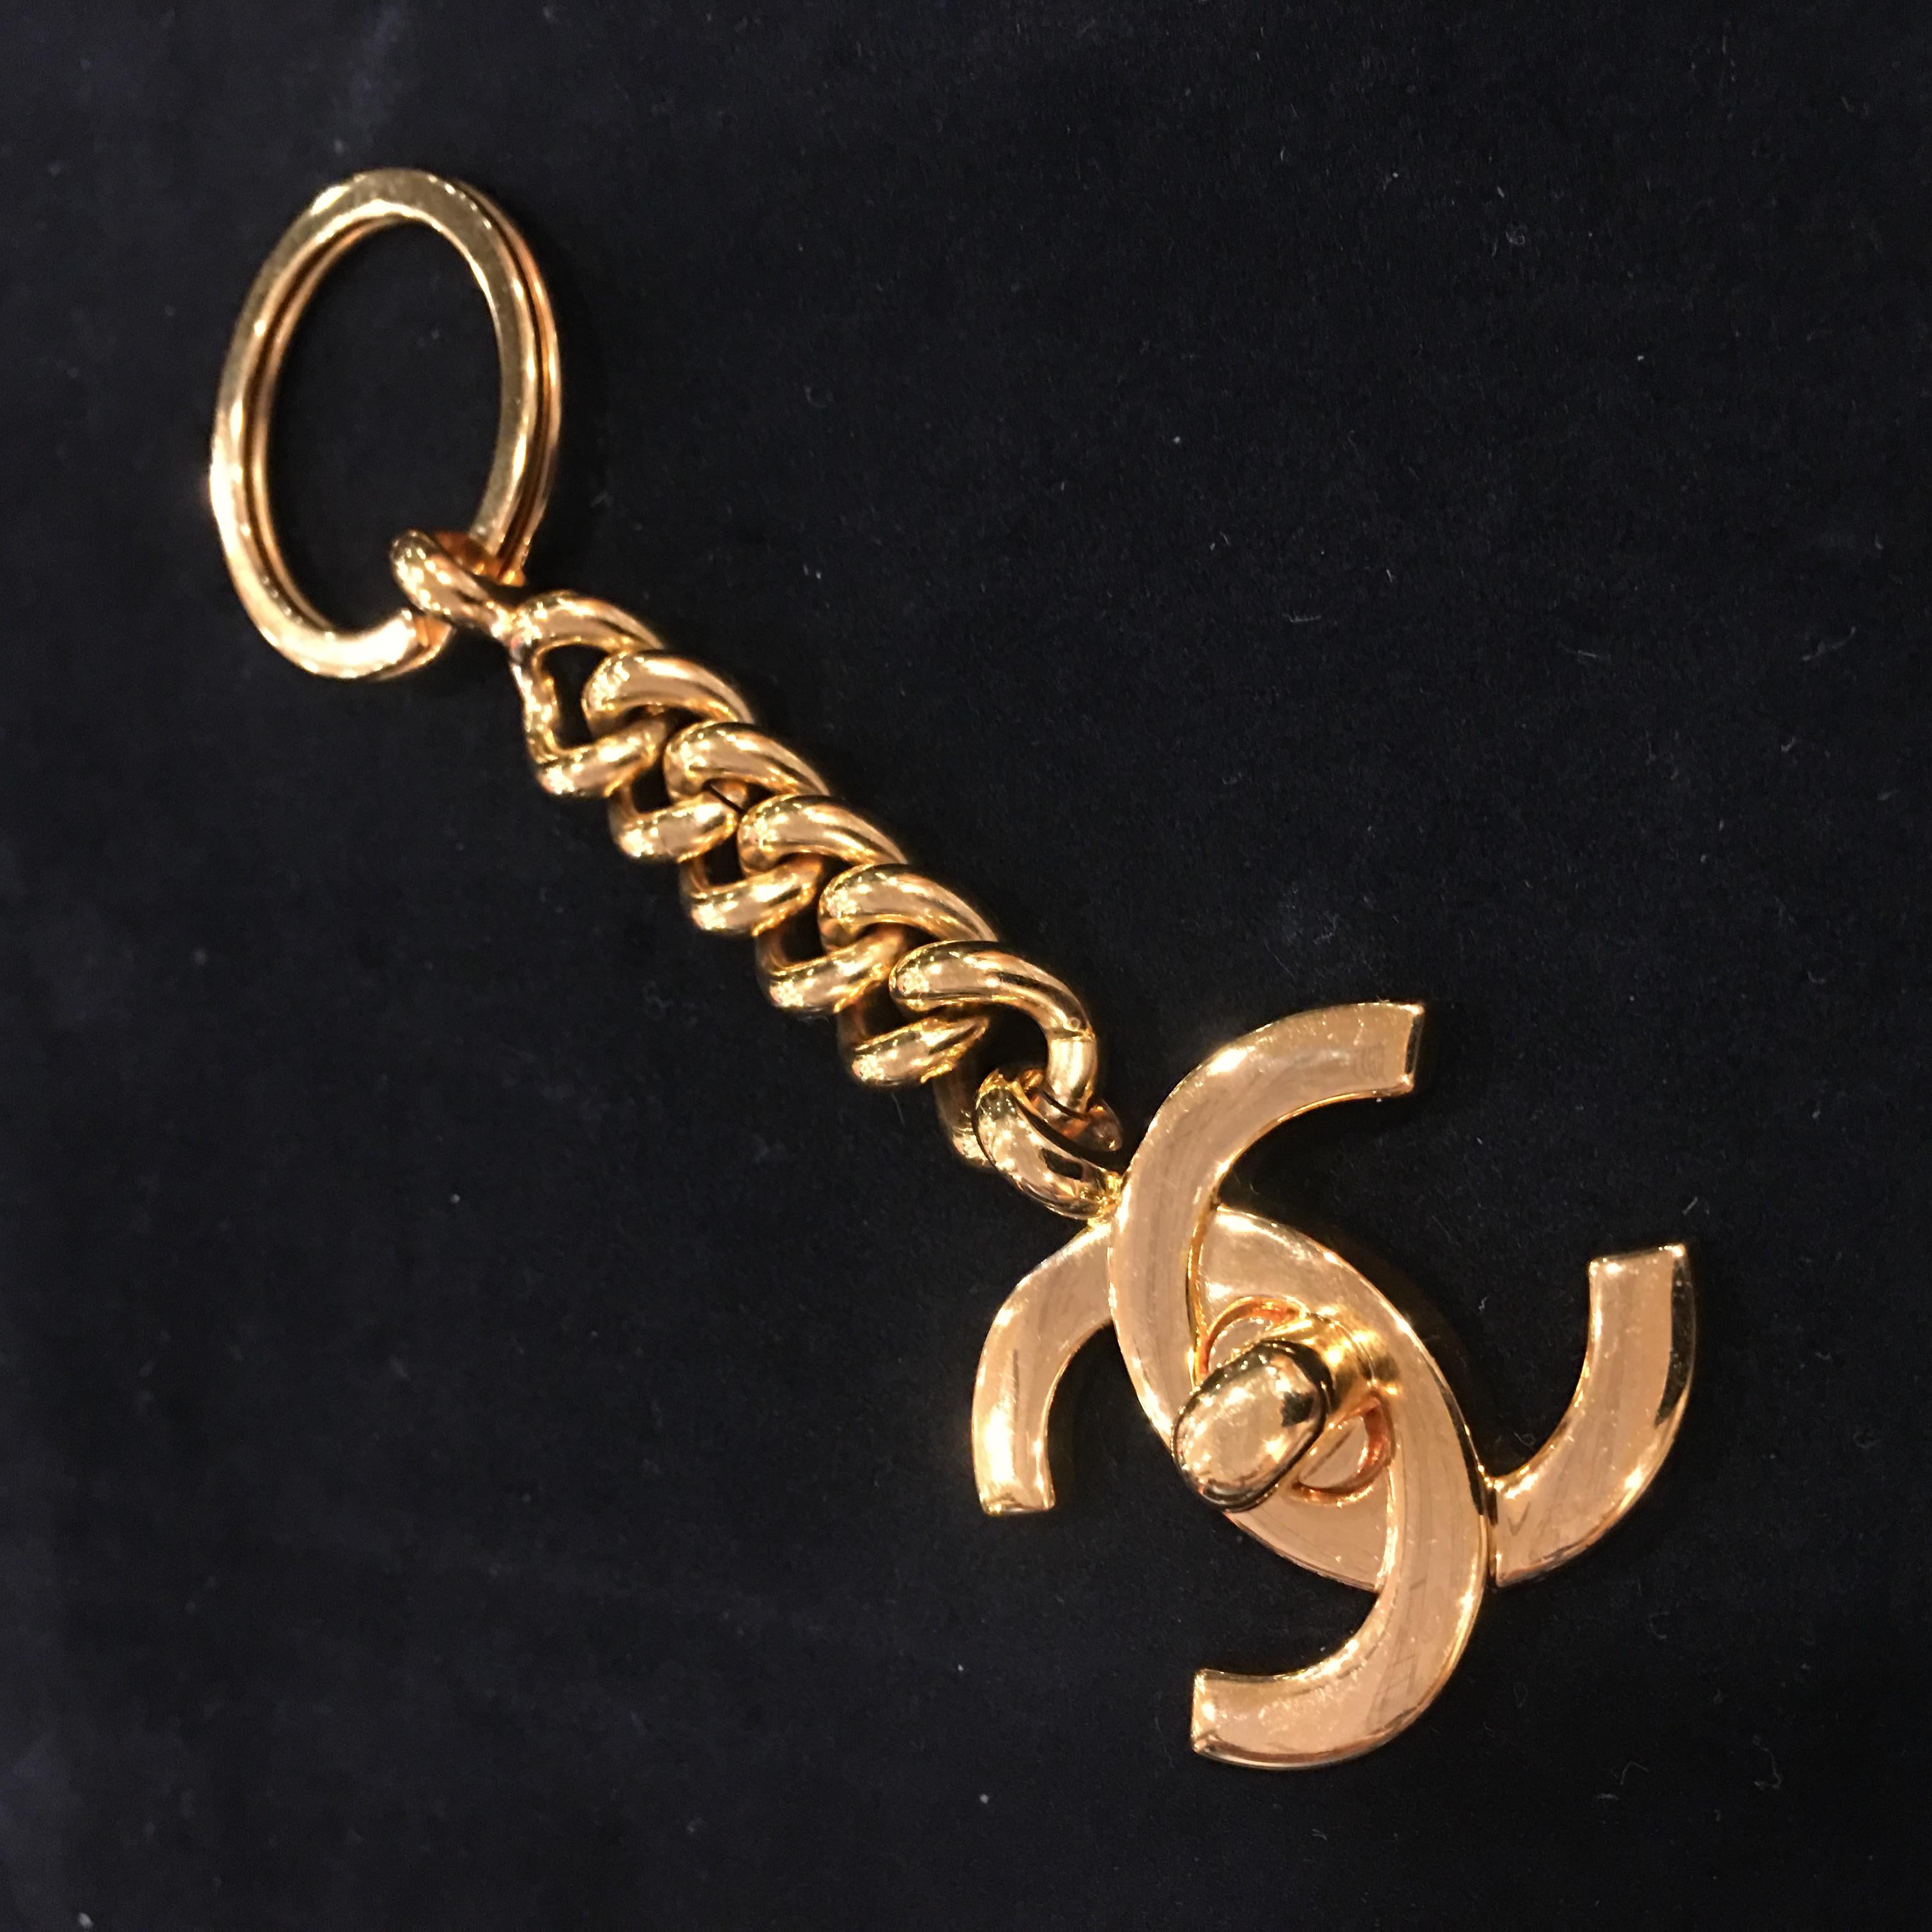 Brand: Chanel
Reference: JW321
Measurement of Logo: 2.9cm x 3.7cm
Length of Key Chain: 11.5cm
Material: Gilt Metal
Year: 1996
Made in France


Please Note: the jewelries are guarantee 100% authentic pre-owned therefore might have signs of tarnish or